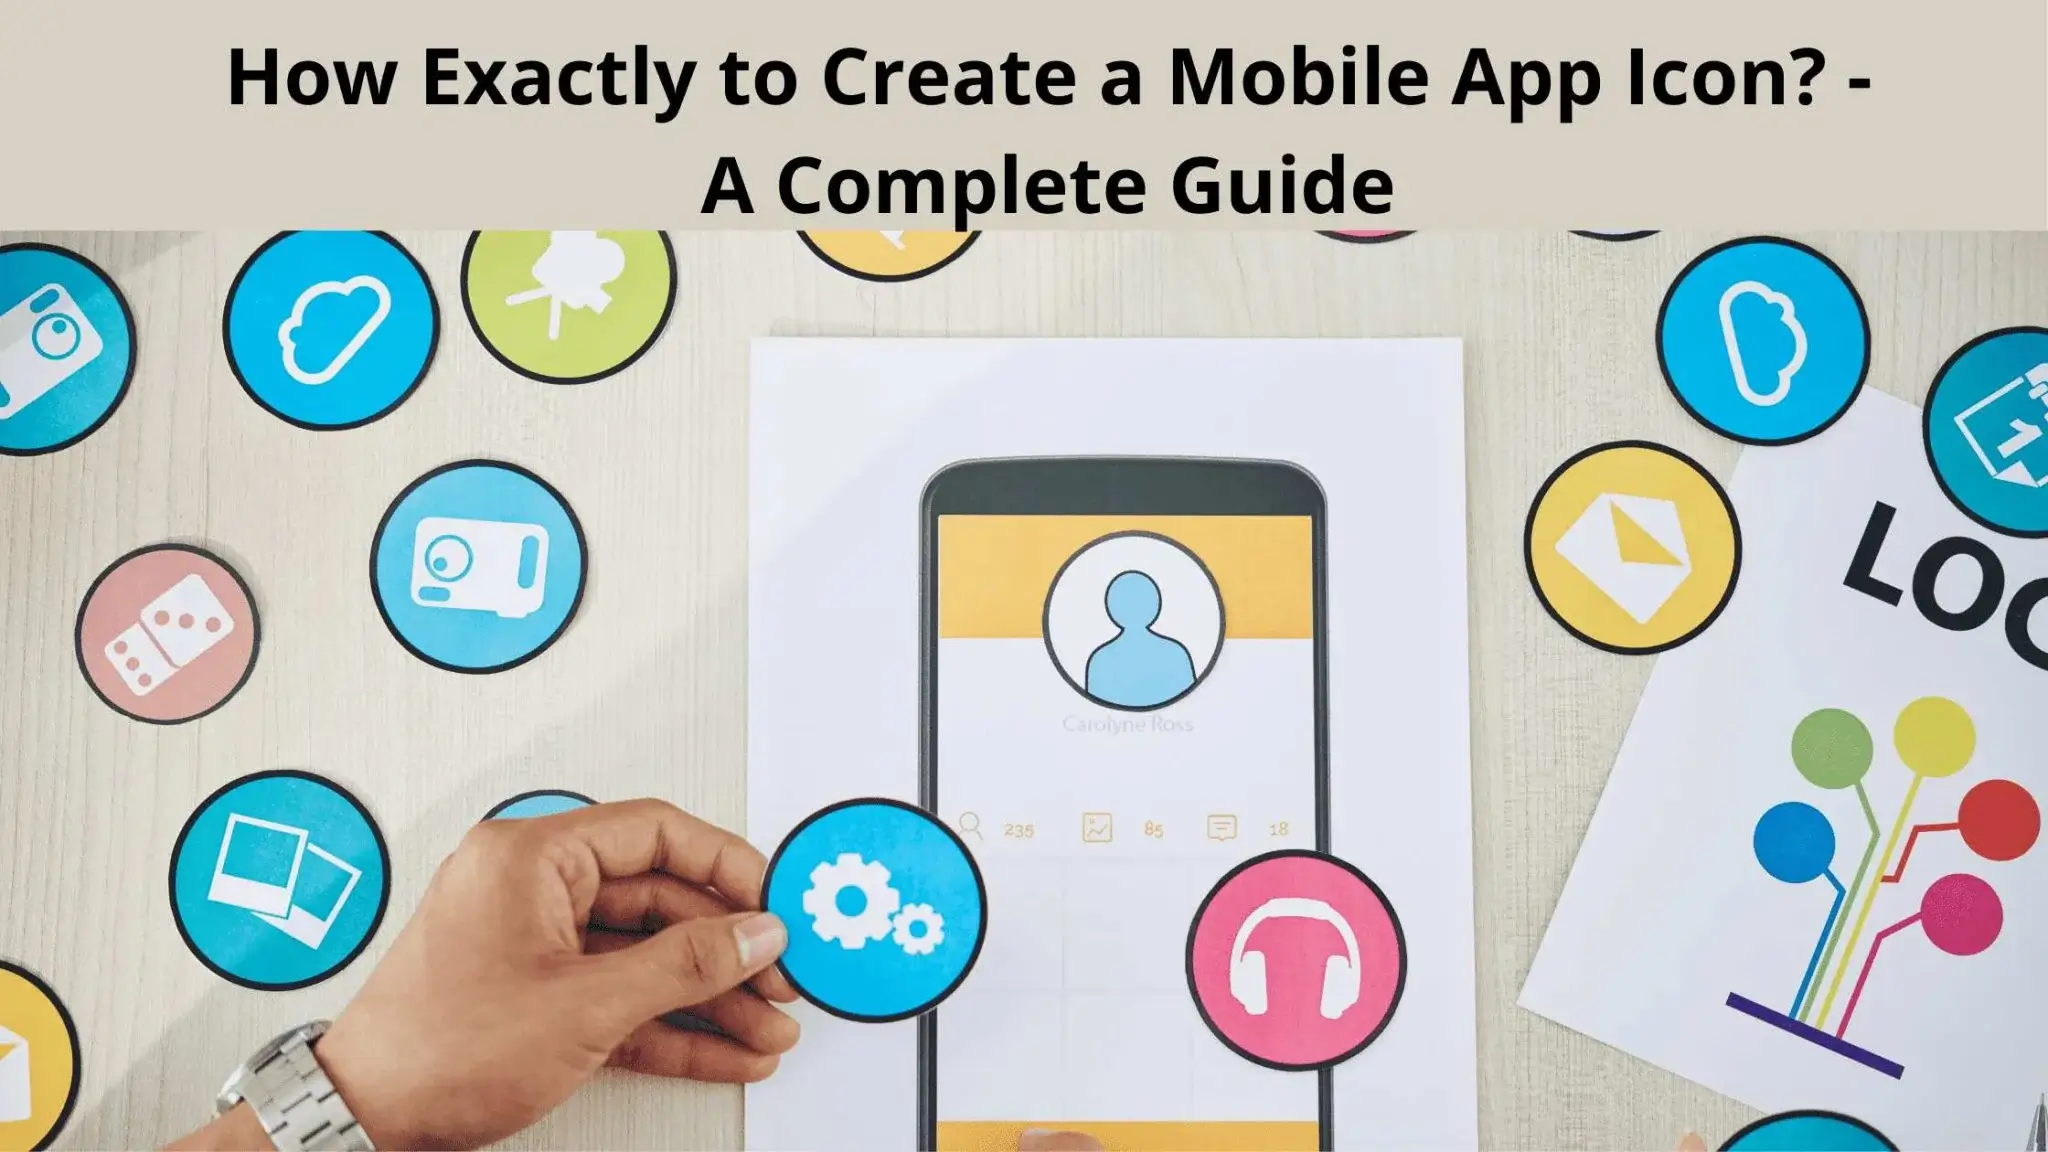 How-Exactly-to-Create-a-Mobile-App-Icon-A-Complete-Guide-2048x1152-1